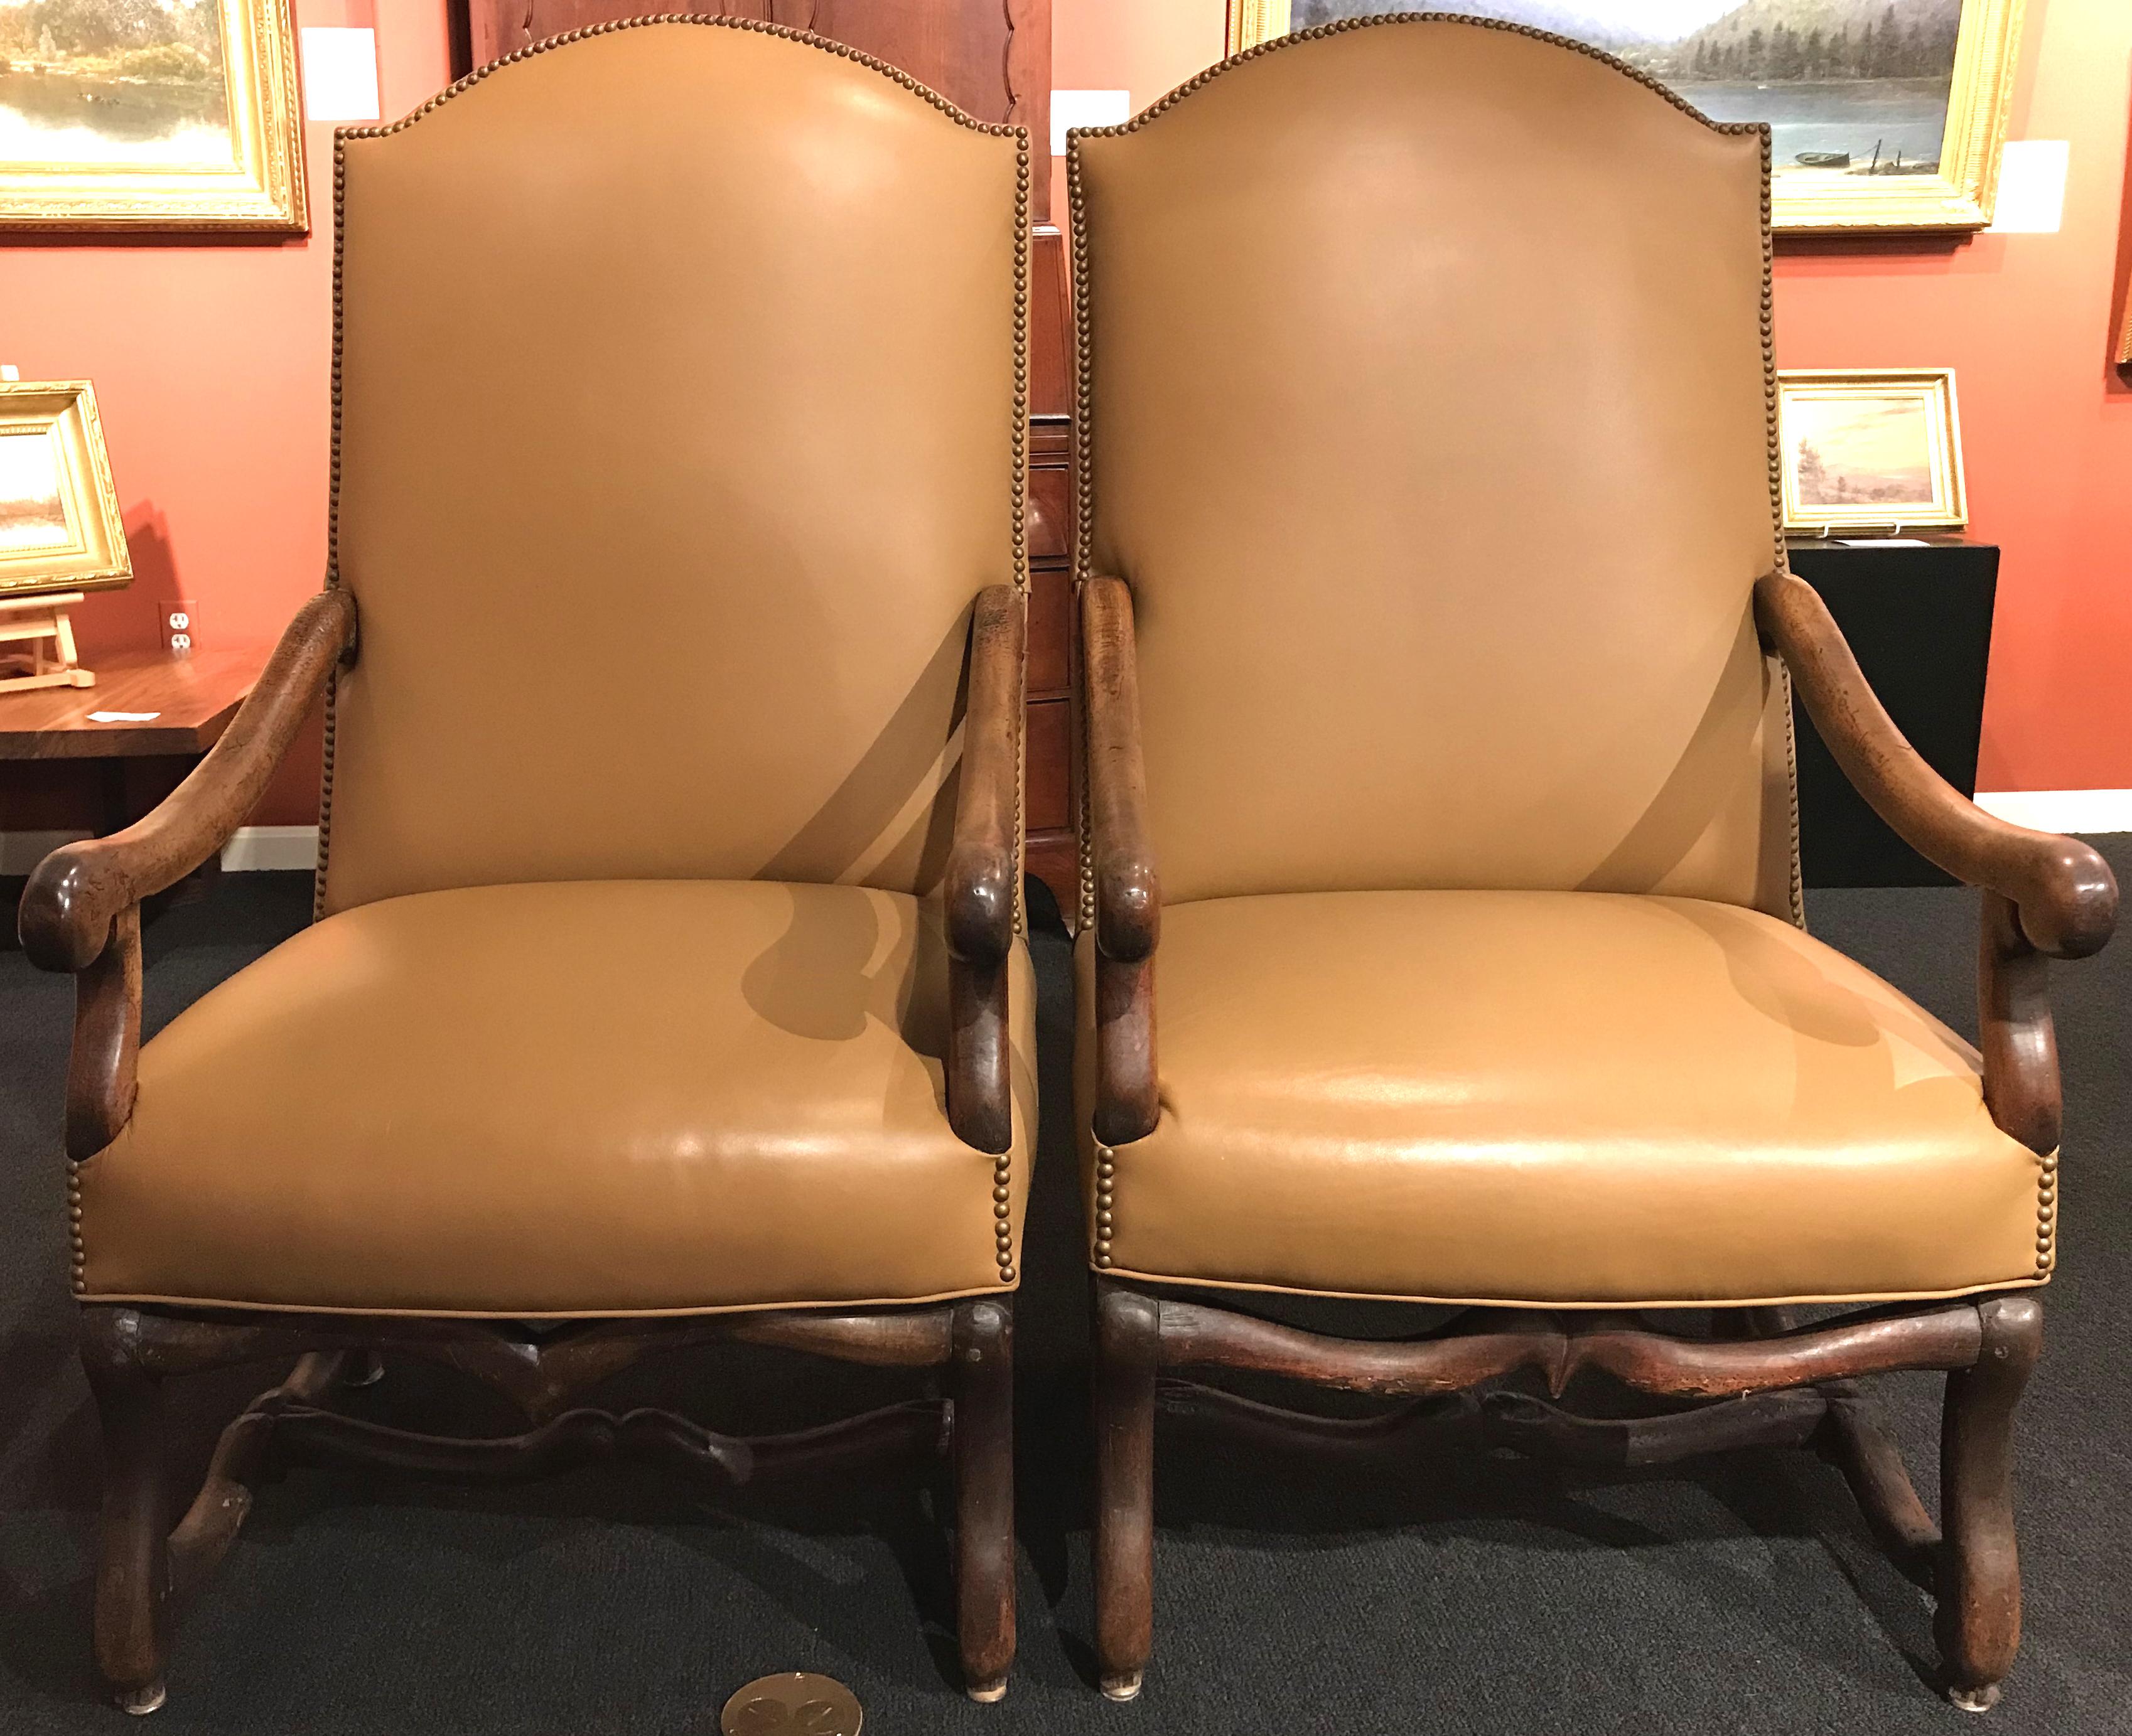 A fine pair of 18th century French walnut armchairs with chapeau de gendarme form backs, H-shaped os du mouton carved stretchers, and recent tan leather upholstery with nailwork border. Pegged construction and great overall patina, with some old